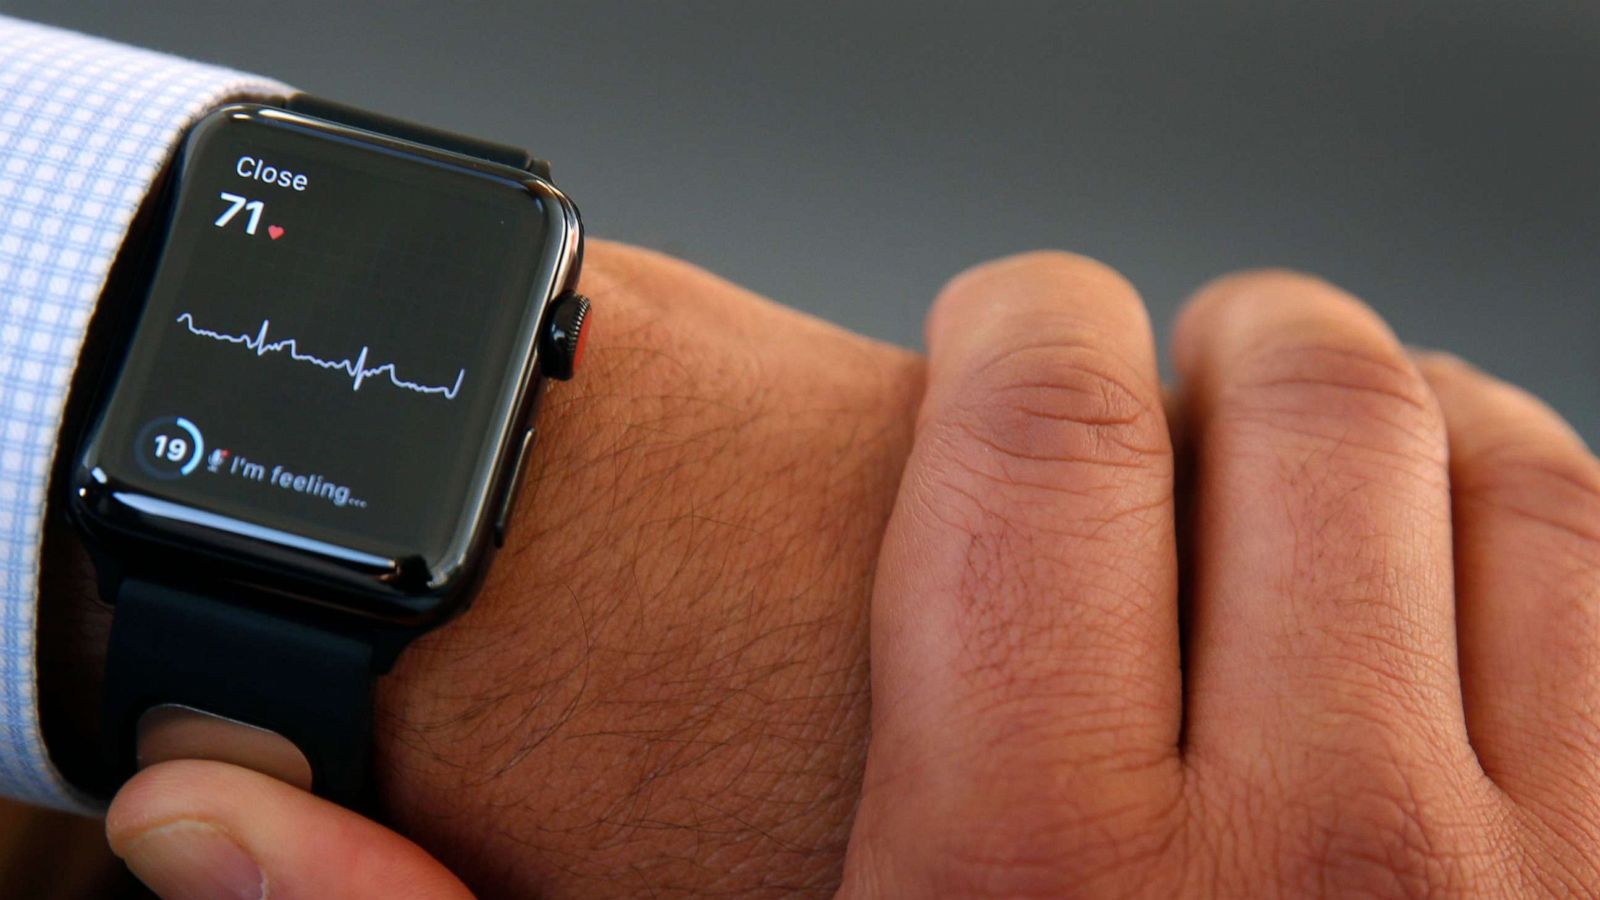 Video Apple Watch finds new ways to track health - ABC News